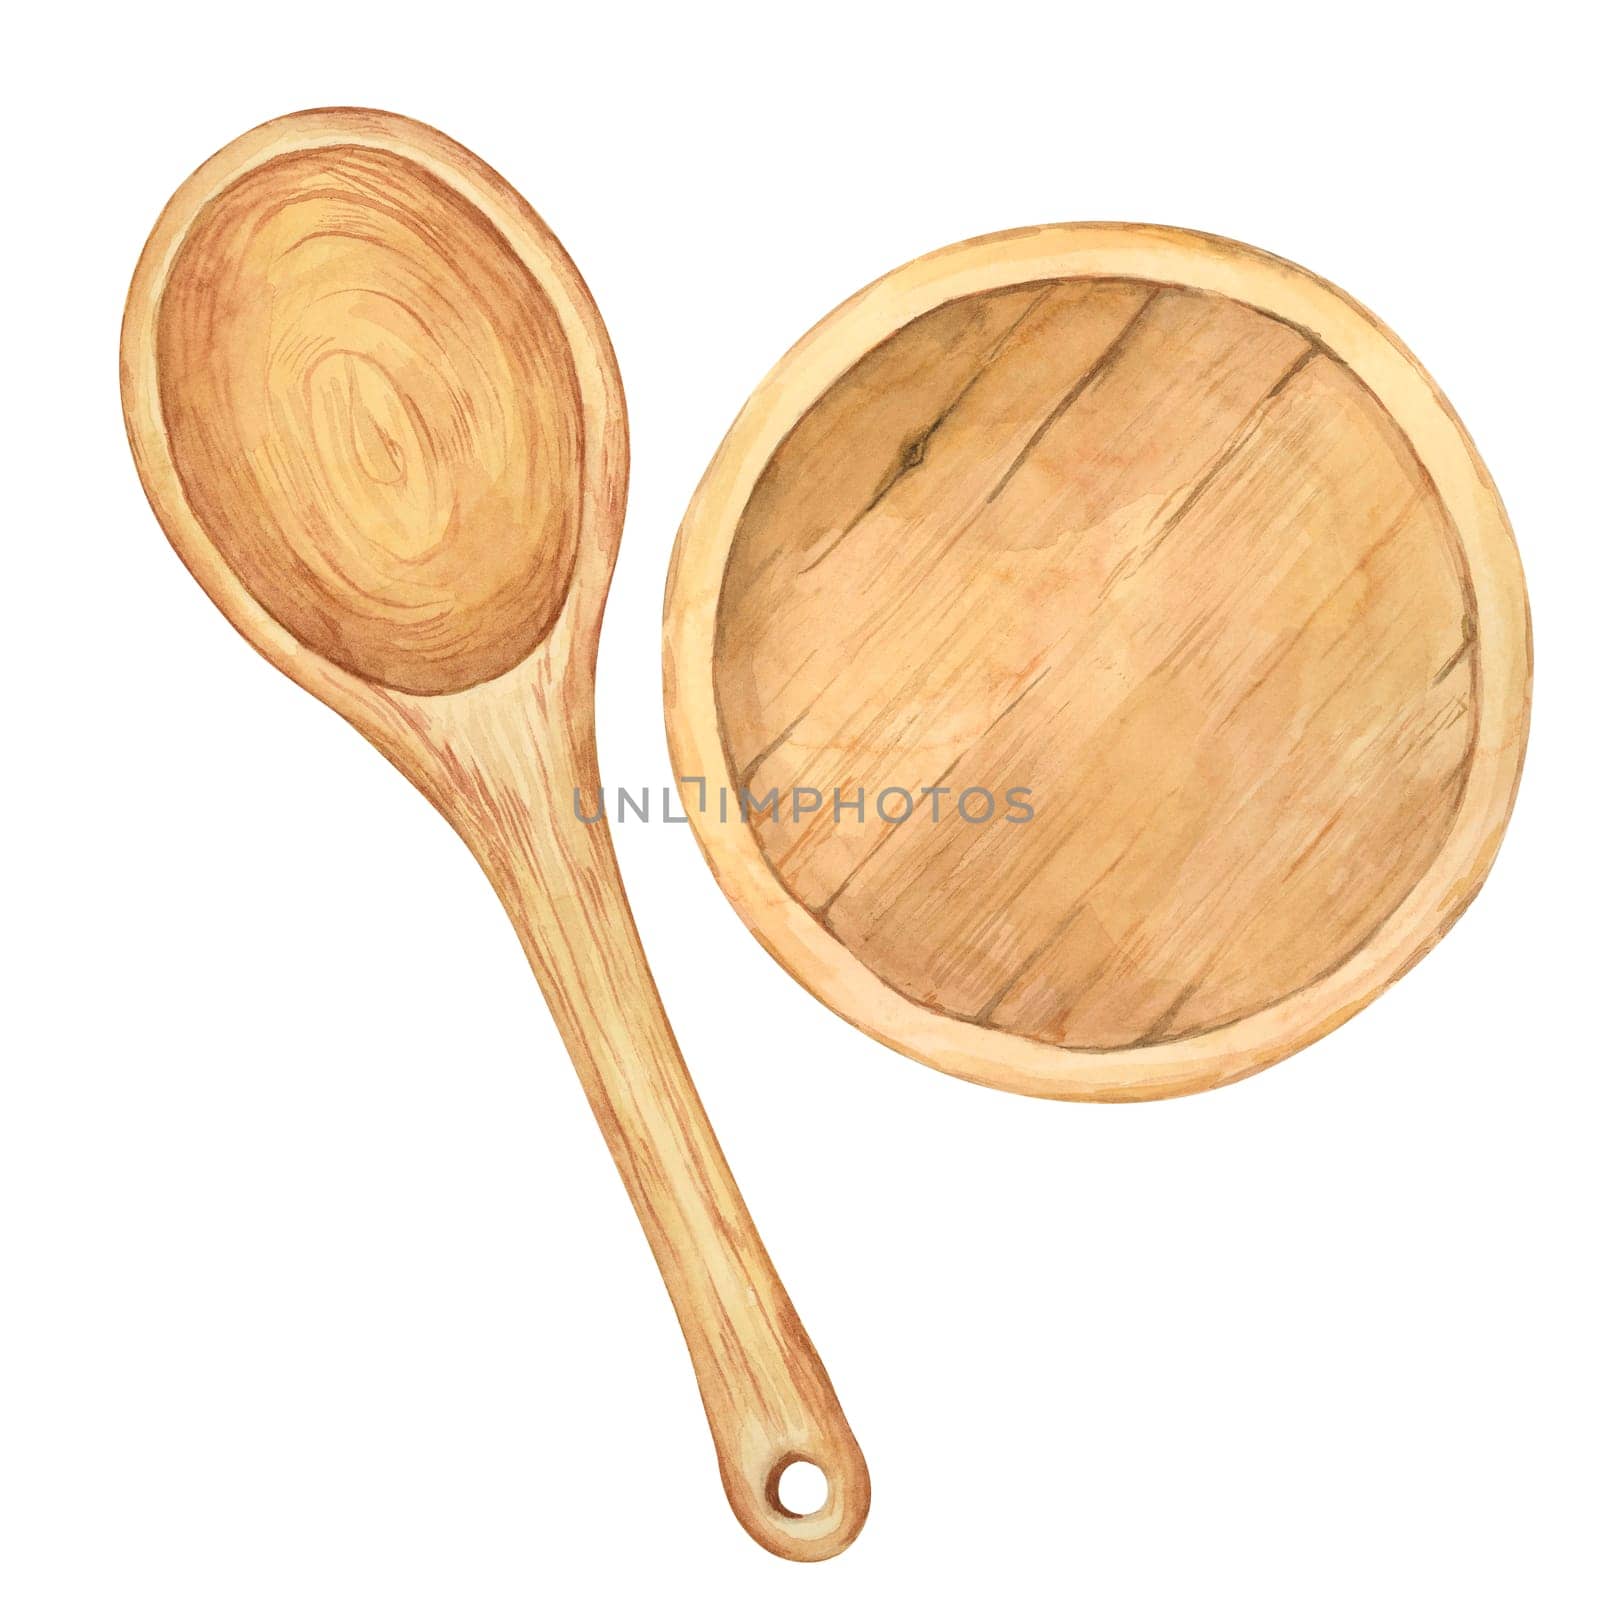 Wooden spoon and plate in watercolor. Hand drawn clipart of empty wooden spatula and plate in rustic style. Design of kitchen utensil for printing, packaging, elements isolated on white background